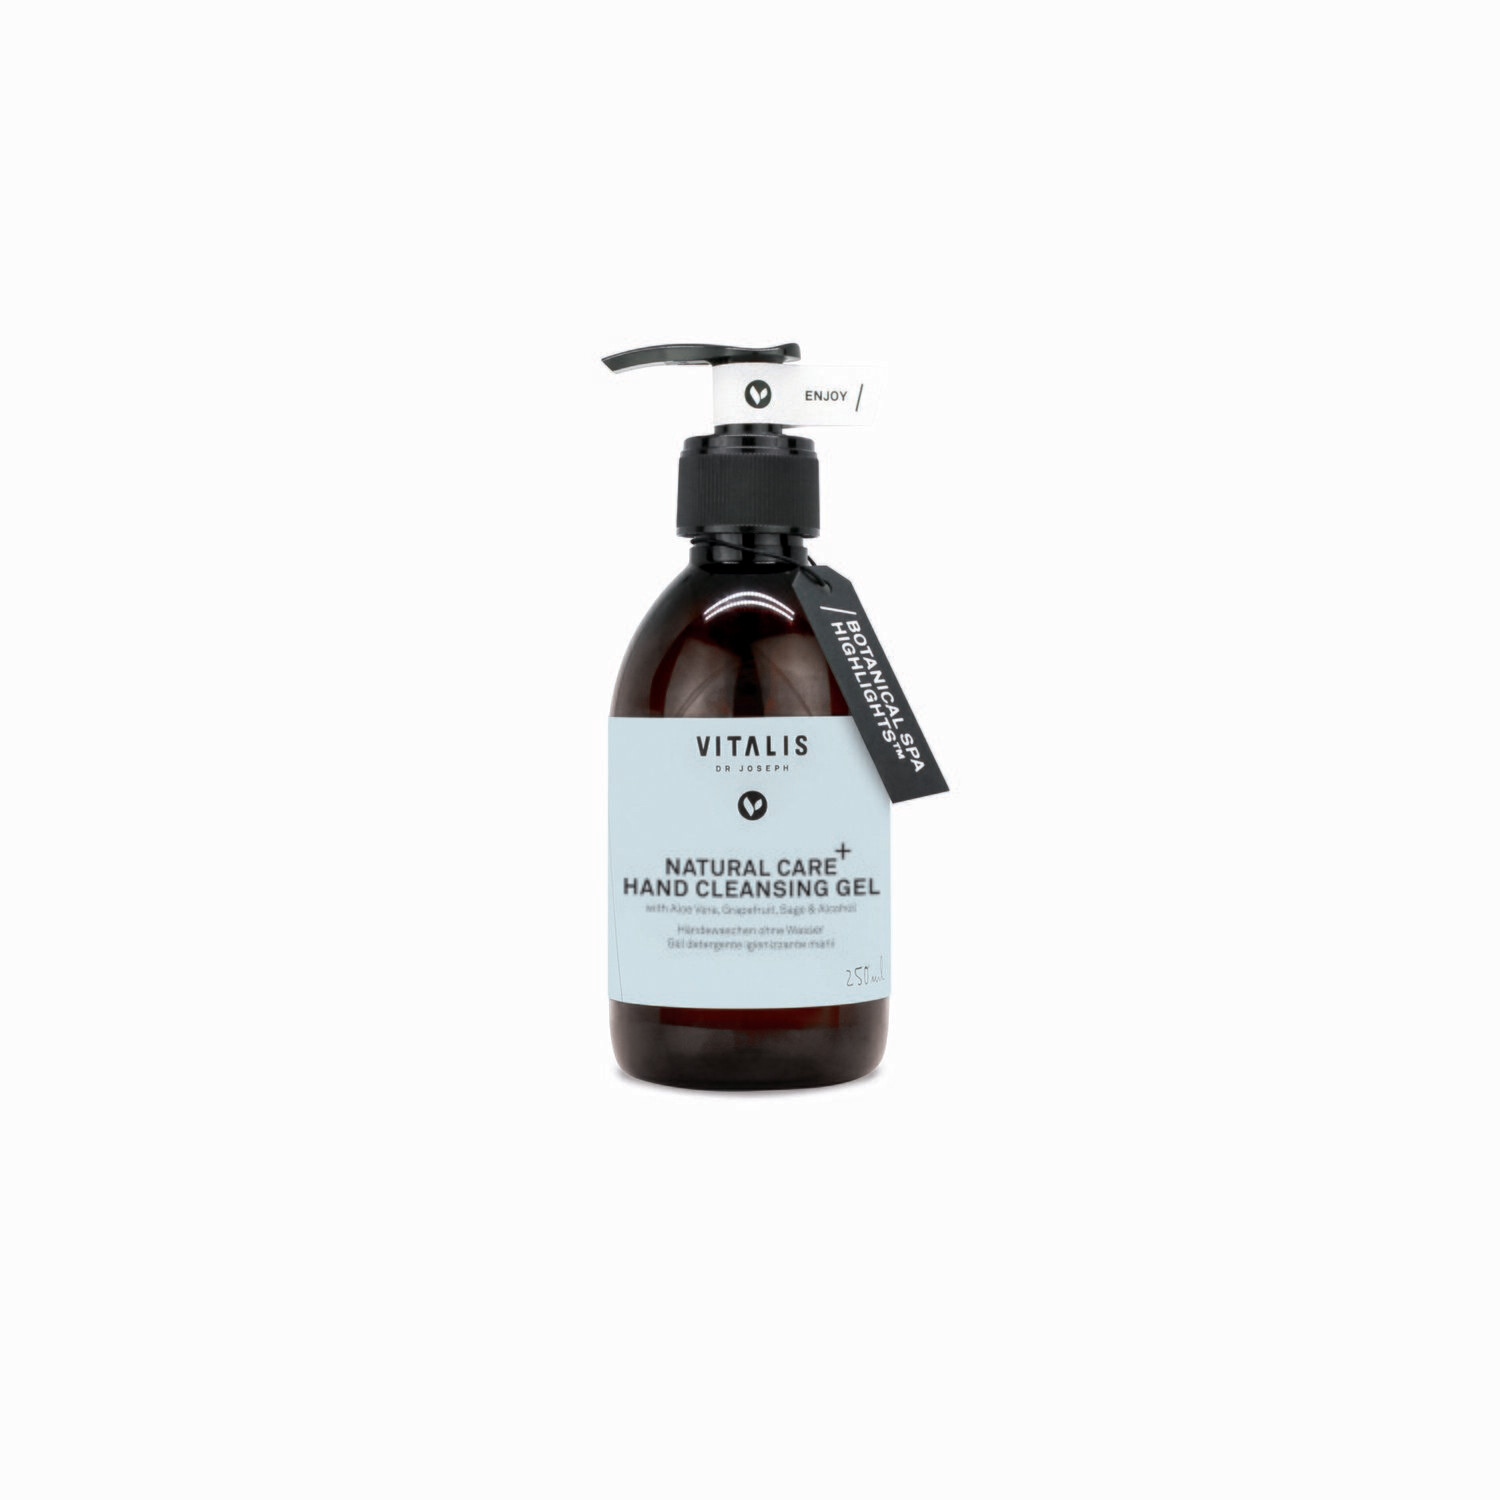 Natural Care Hand Cleansing Gel